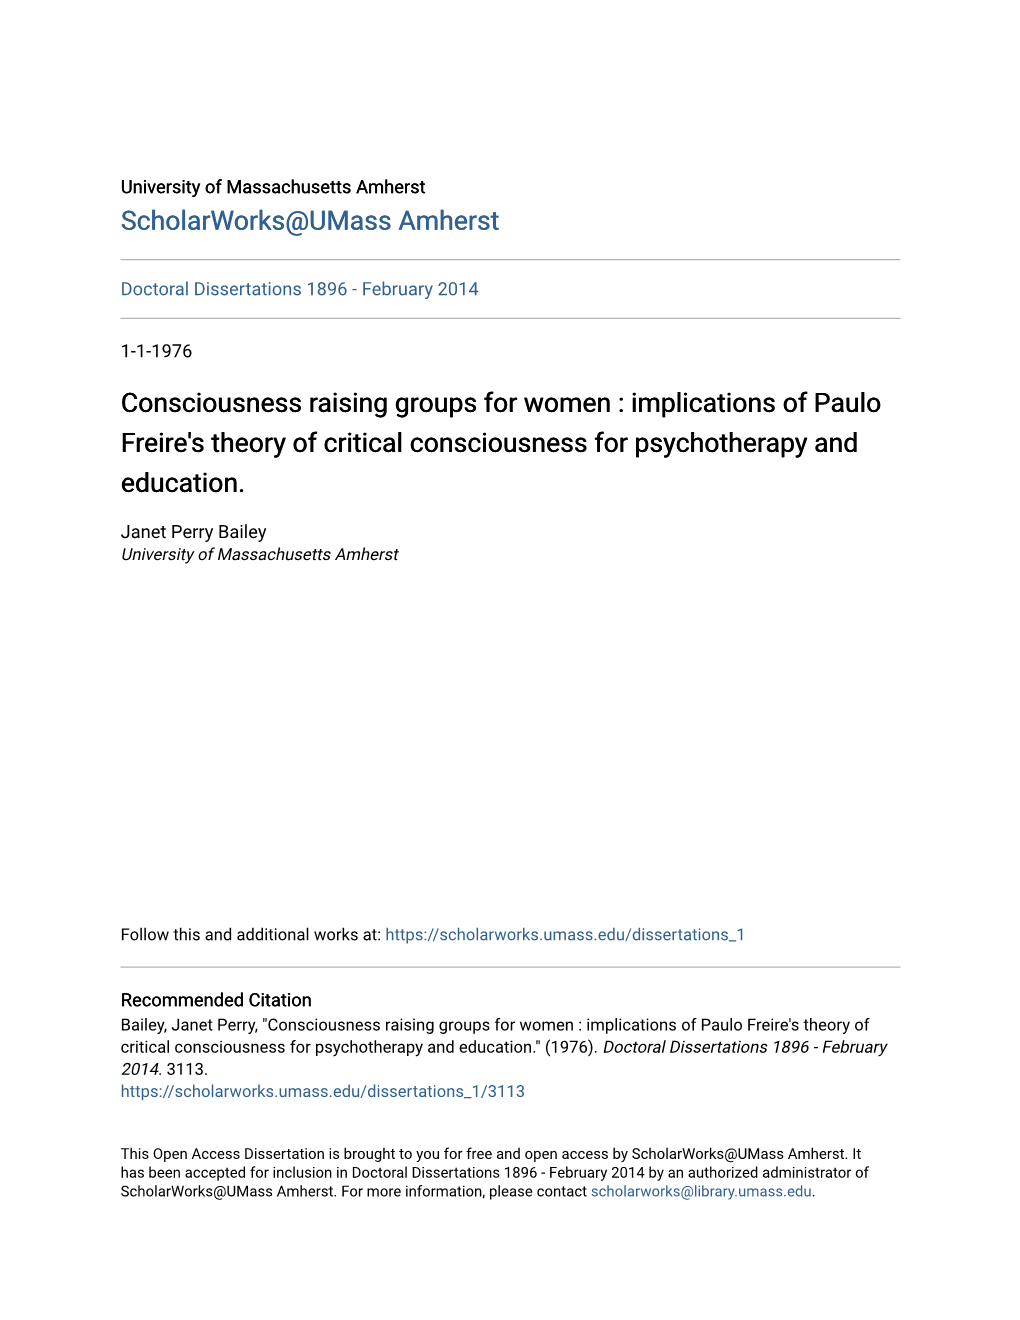 Consciousness Raising Groups for Women : Implications of Paulo Freire's Theory of Critical Consciousness for Psychotherapy and Education